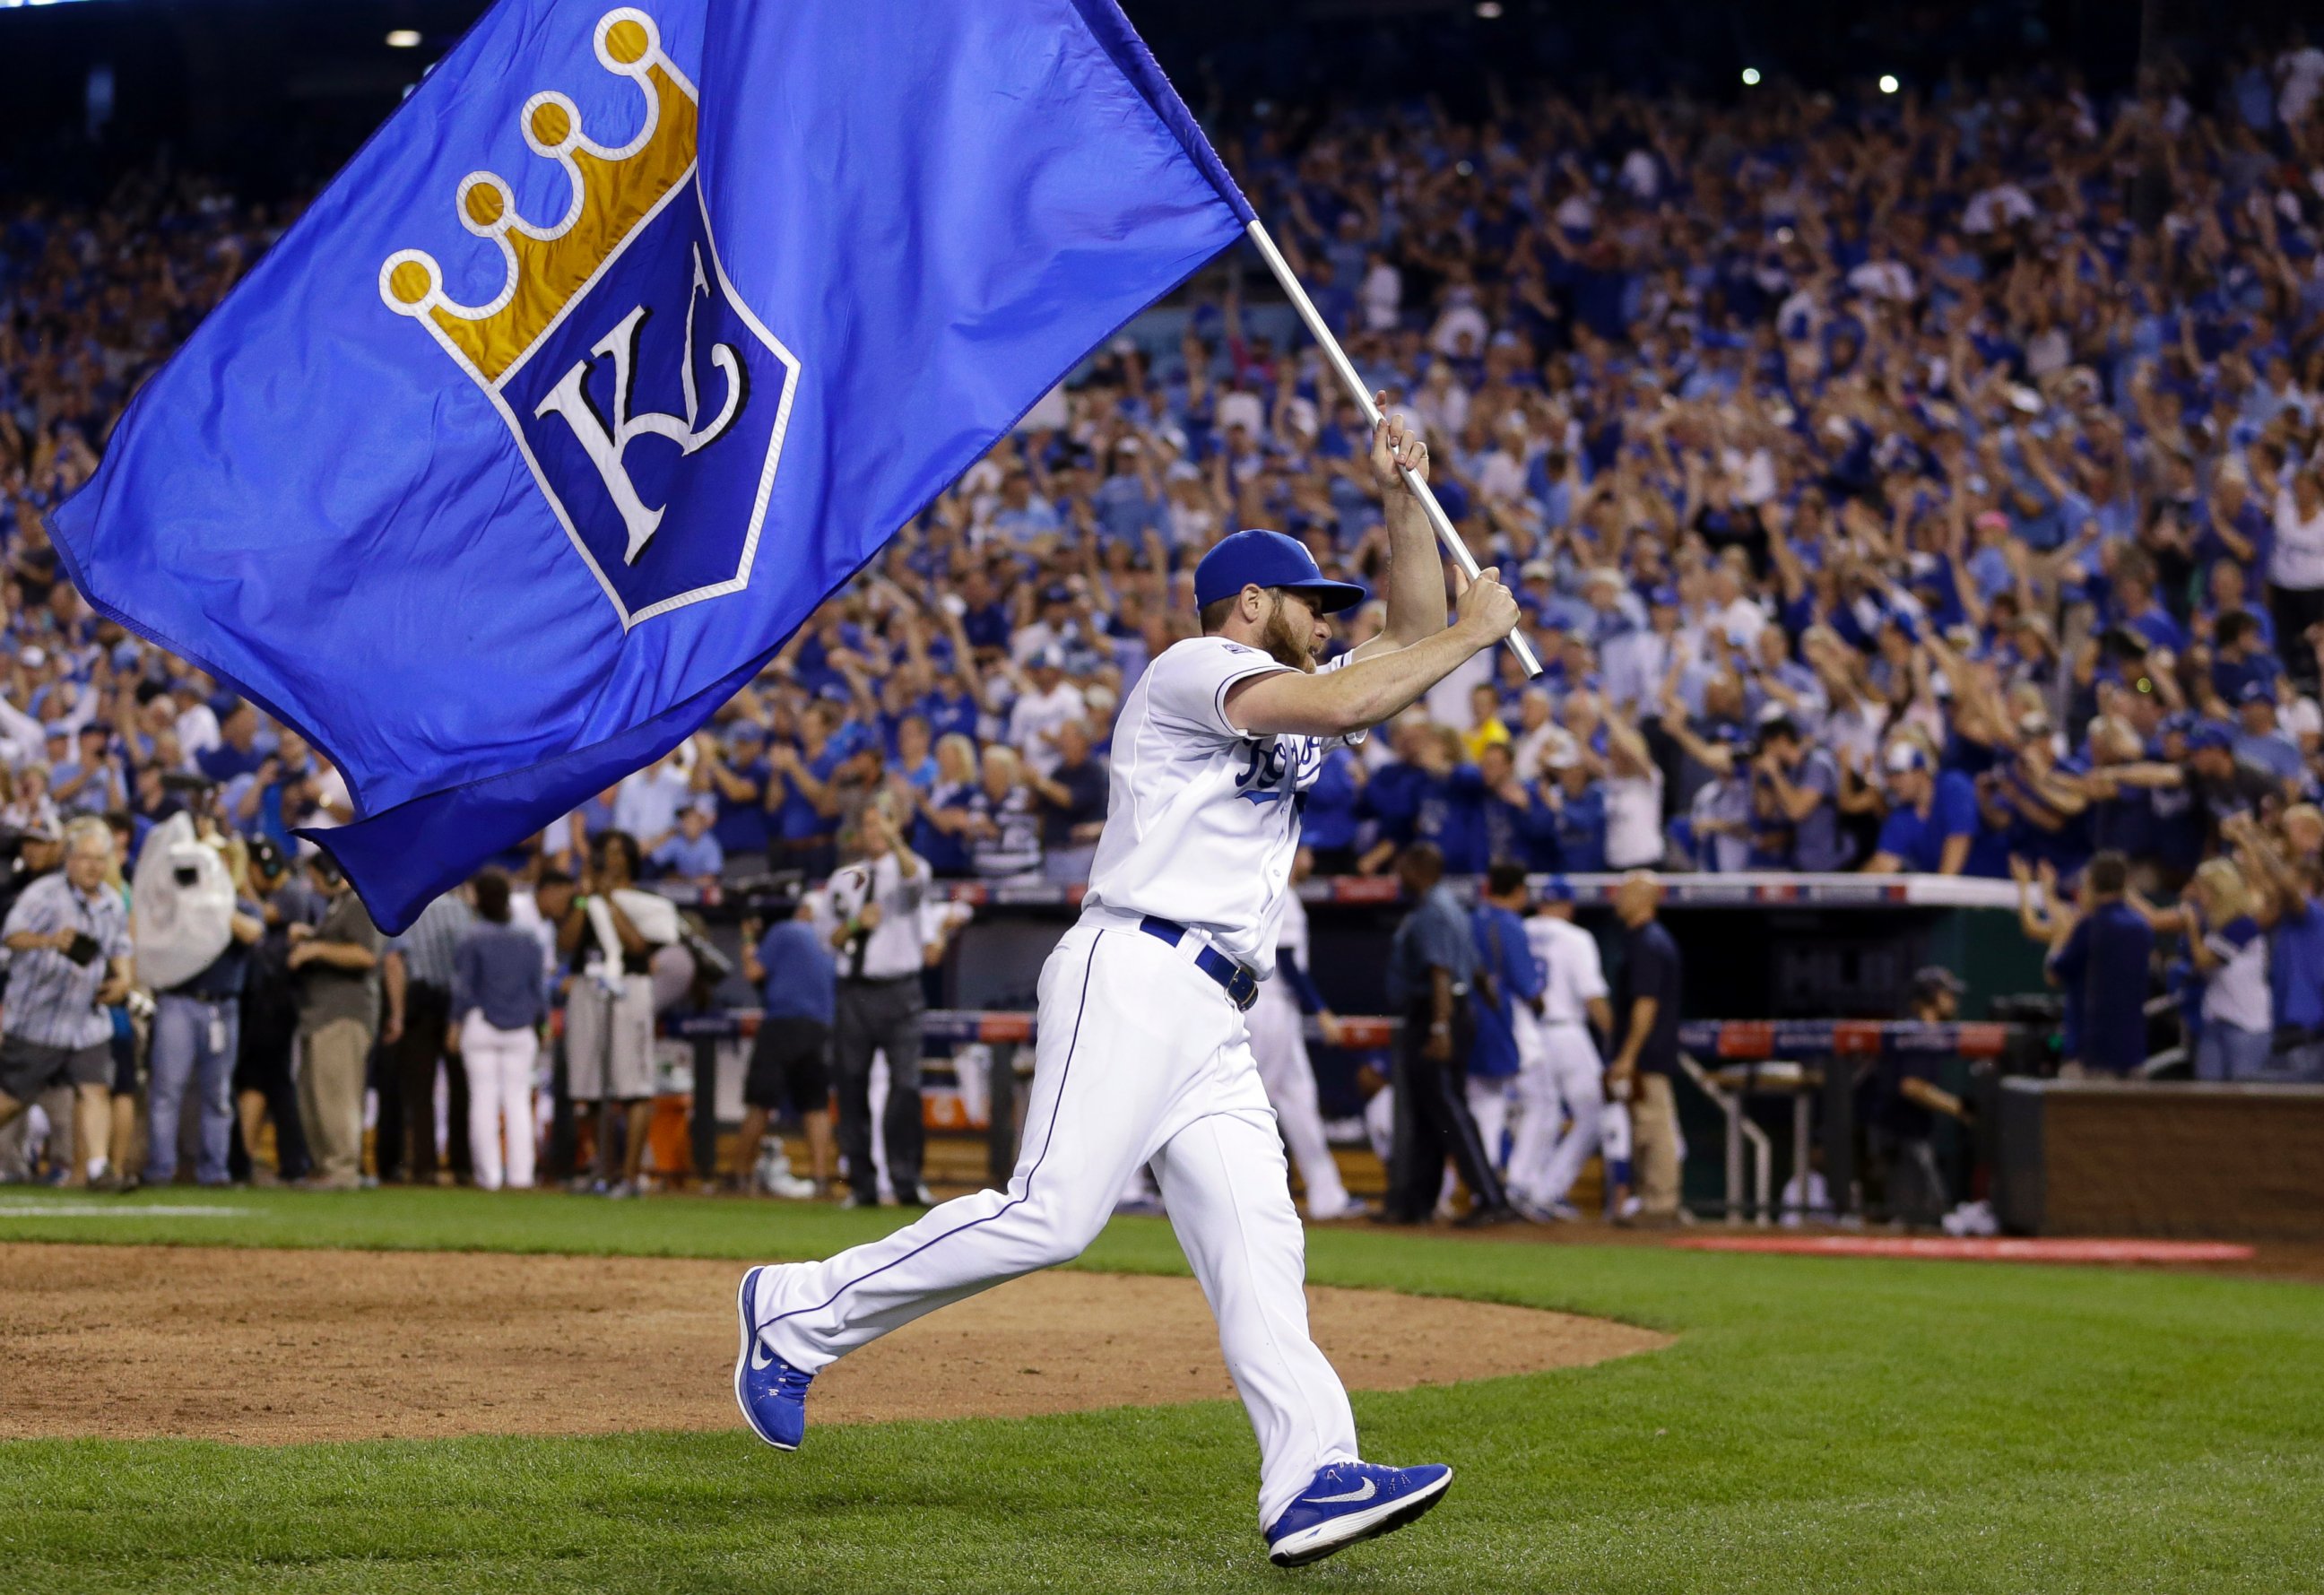 PHOTO: Kansas City Royals' Greg Holland celebrates after the Royals' 9-8 victory over the Oakland Athletics, Sept. 30, 2014, in Kansas City, Mo.